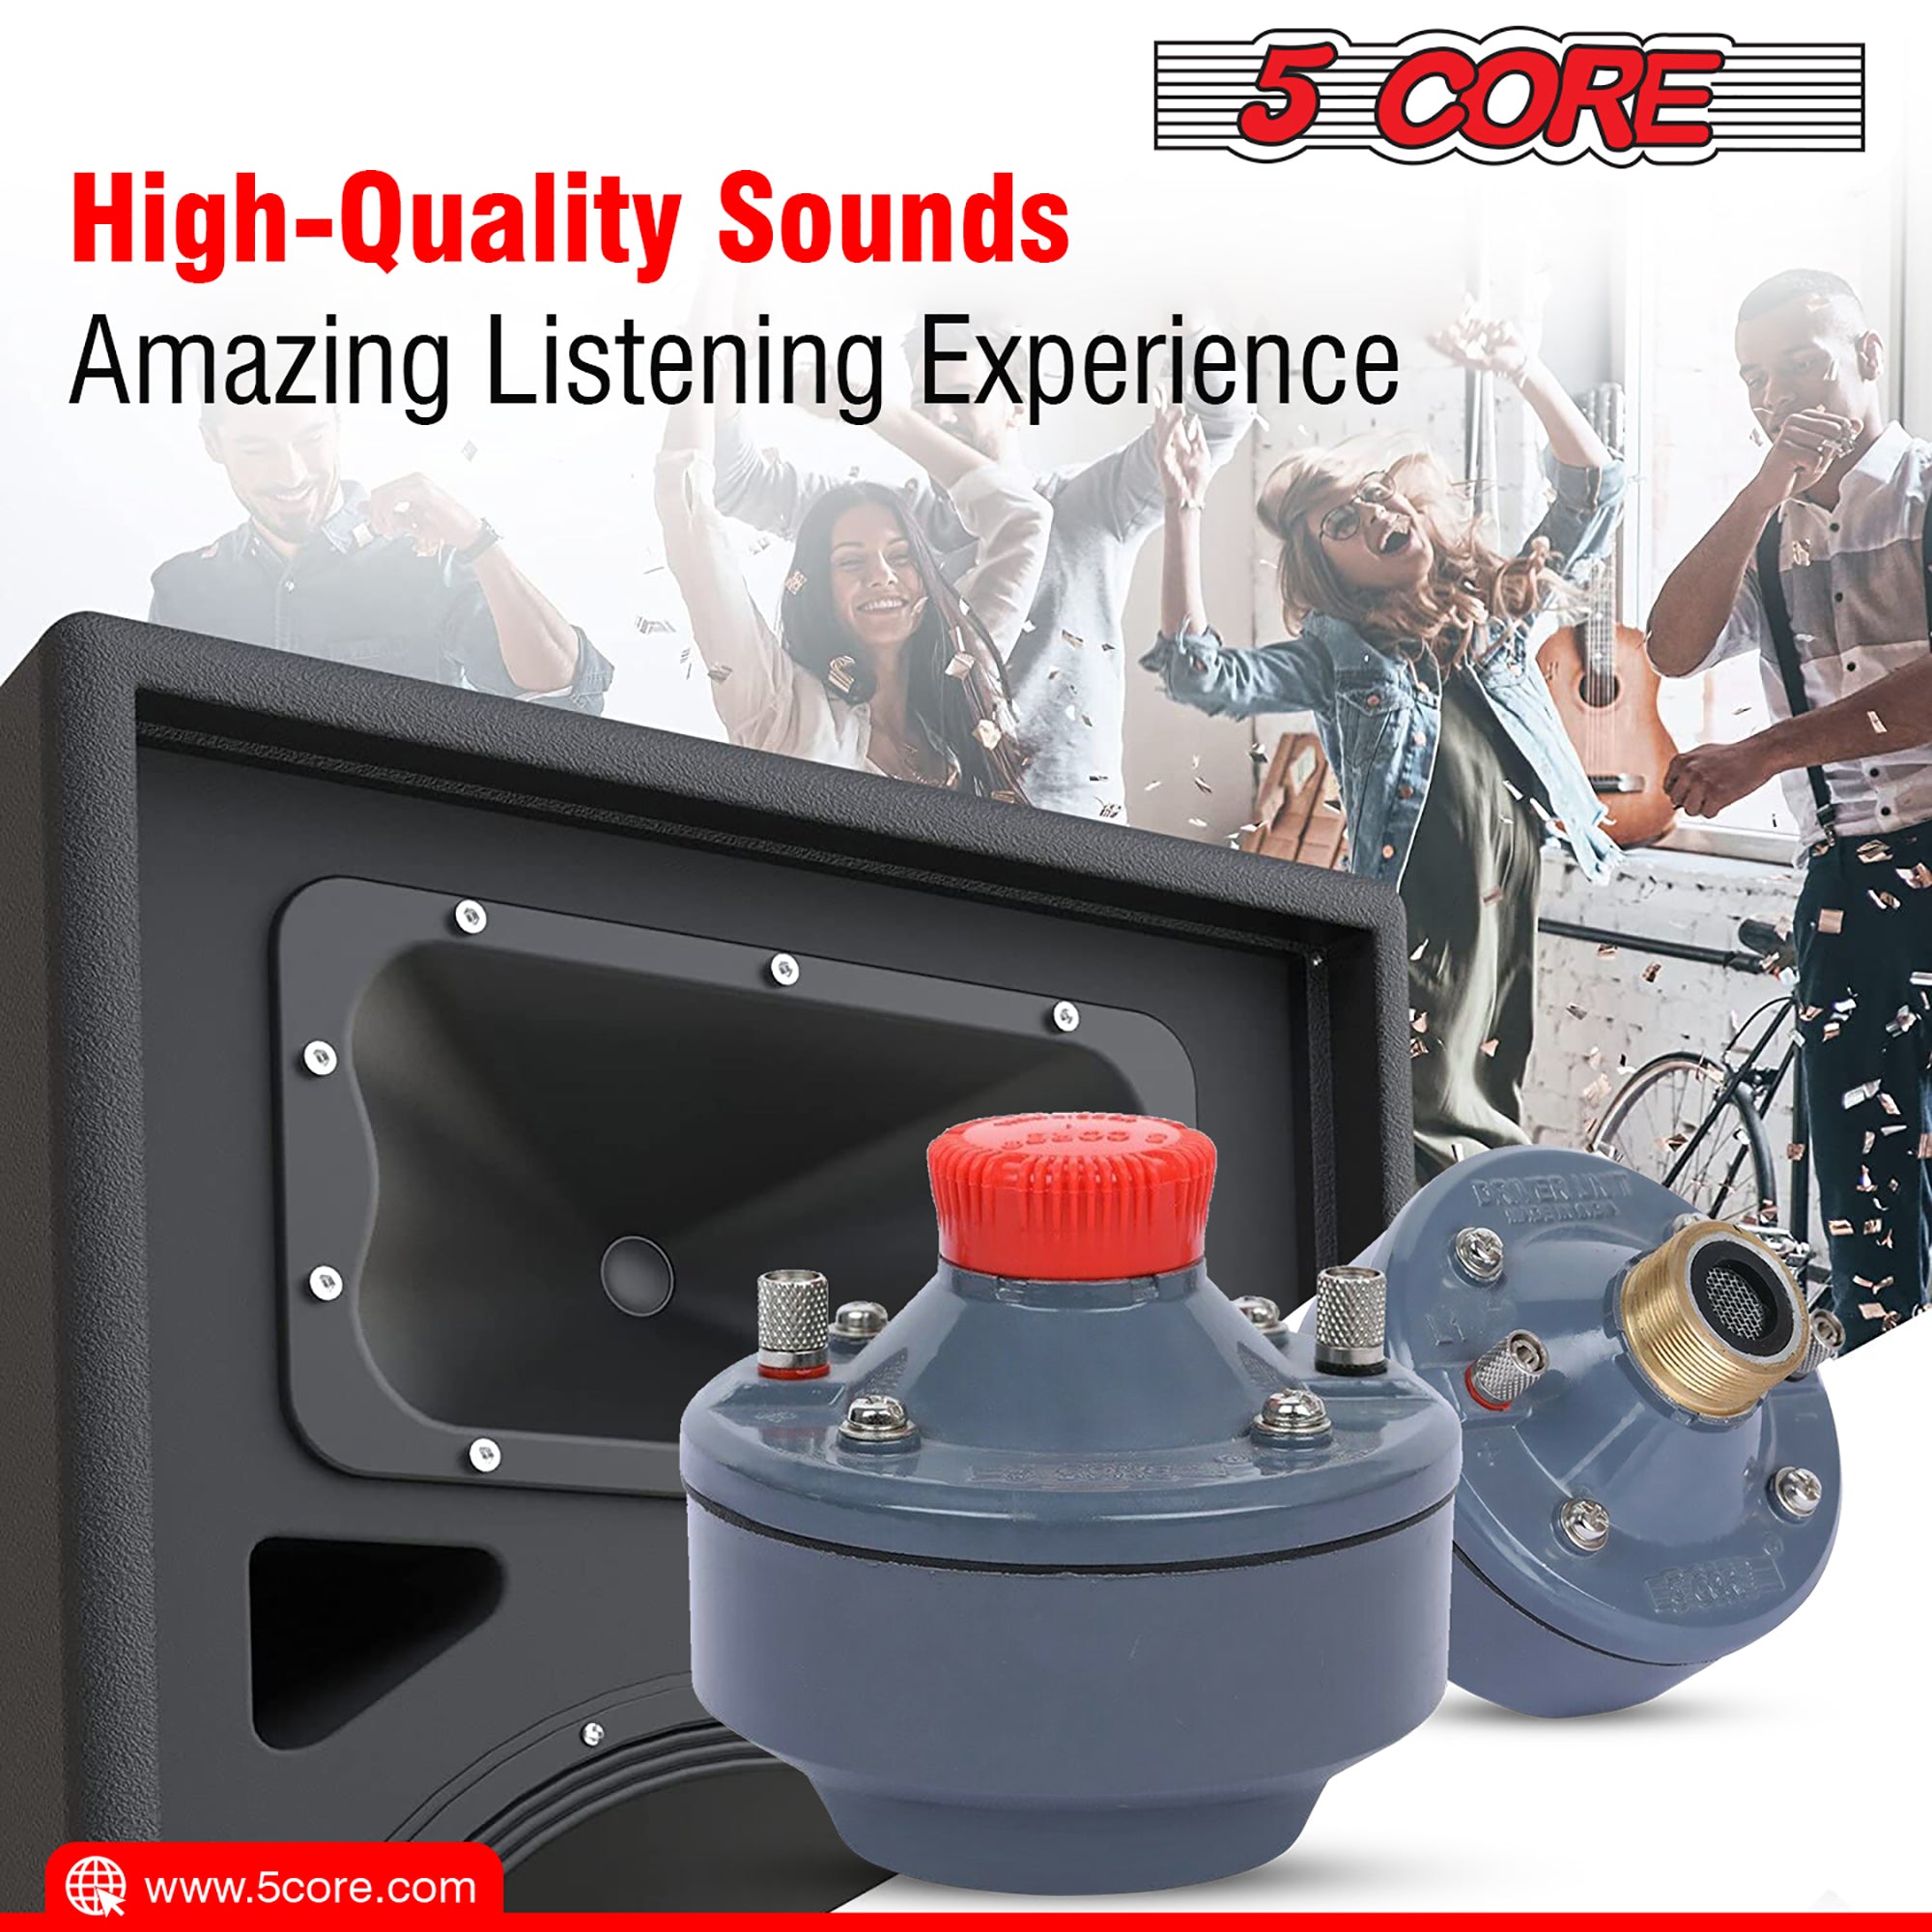 high quality sounds gives by 5 core compression driver